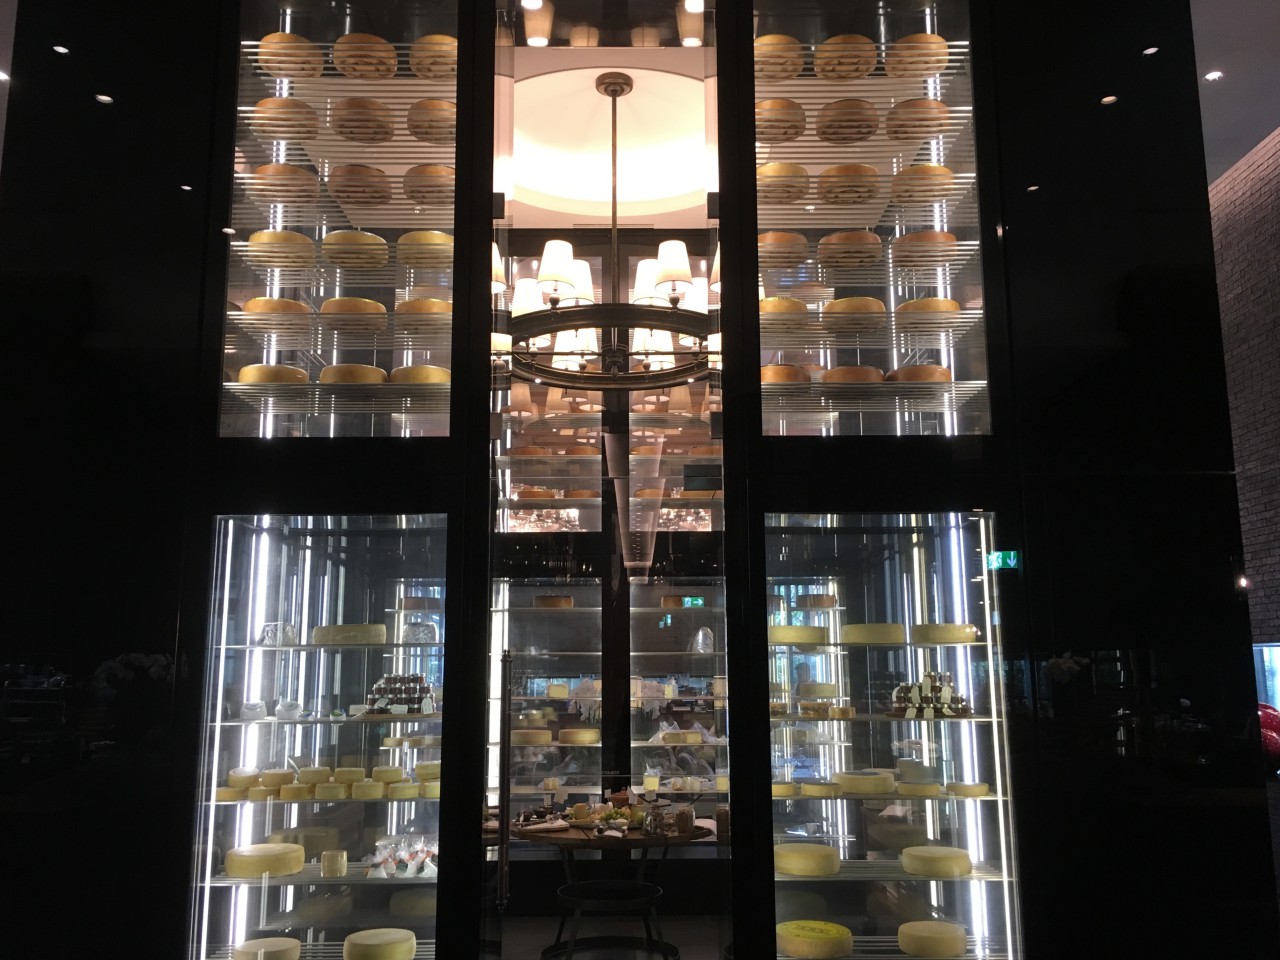 16 Foot Tall Cheese Room, The Chedi Andermatt Review